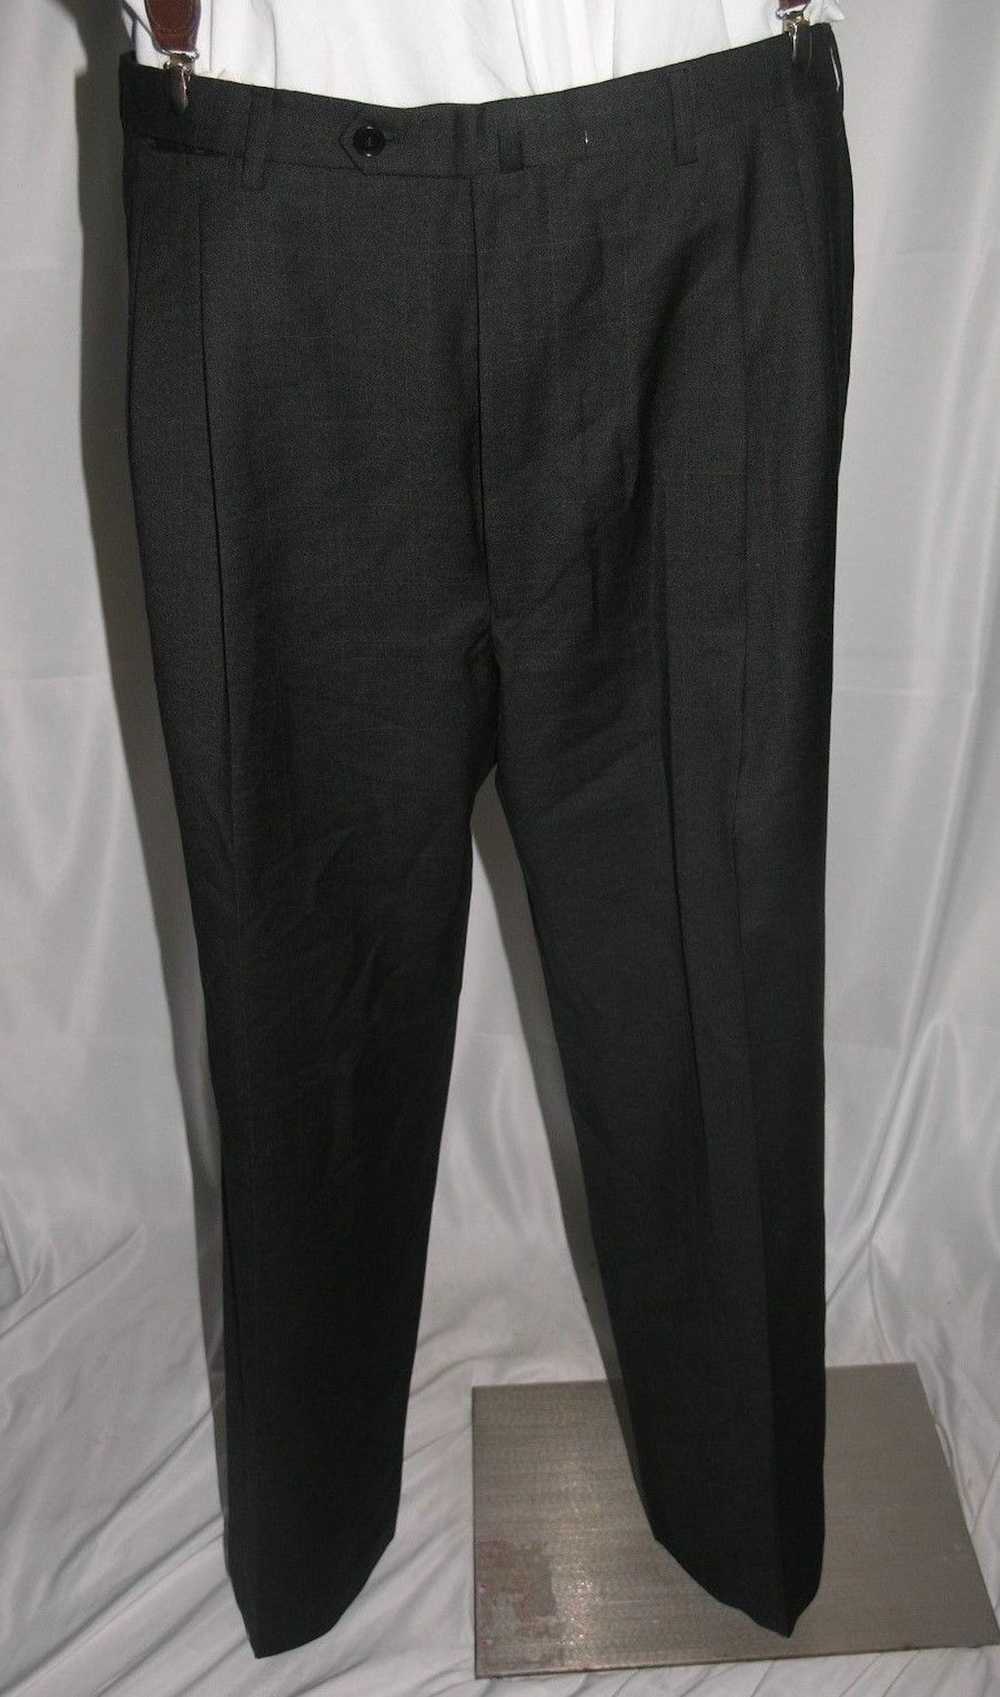 Davenza Roma Hand Tailored Three Button Suit 46L - image 10